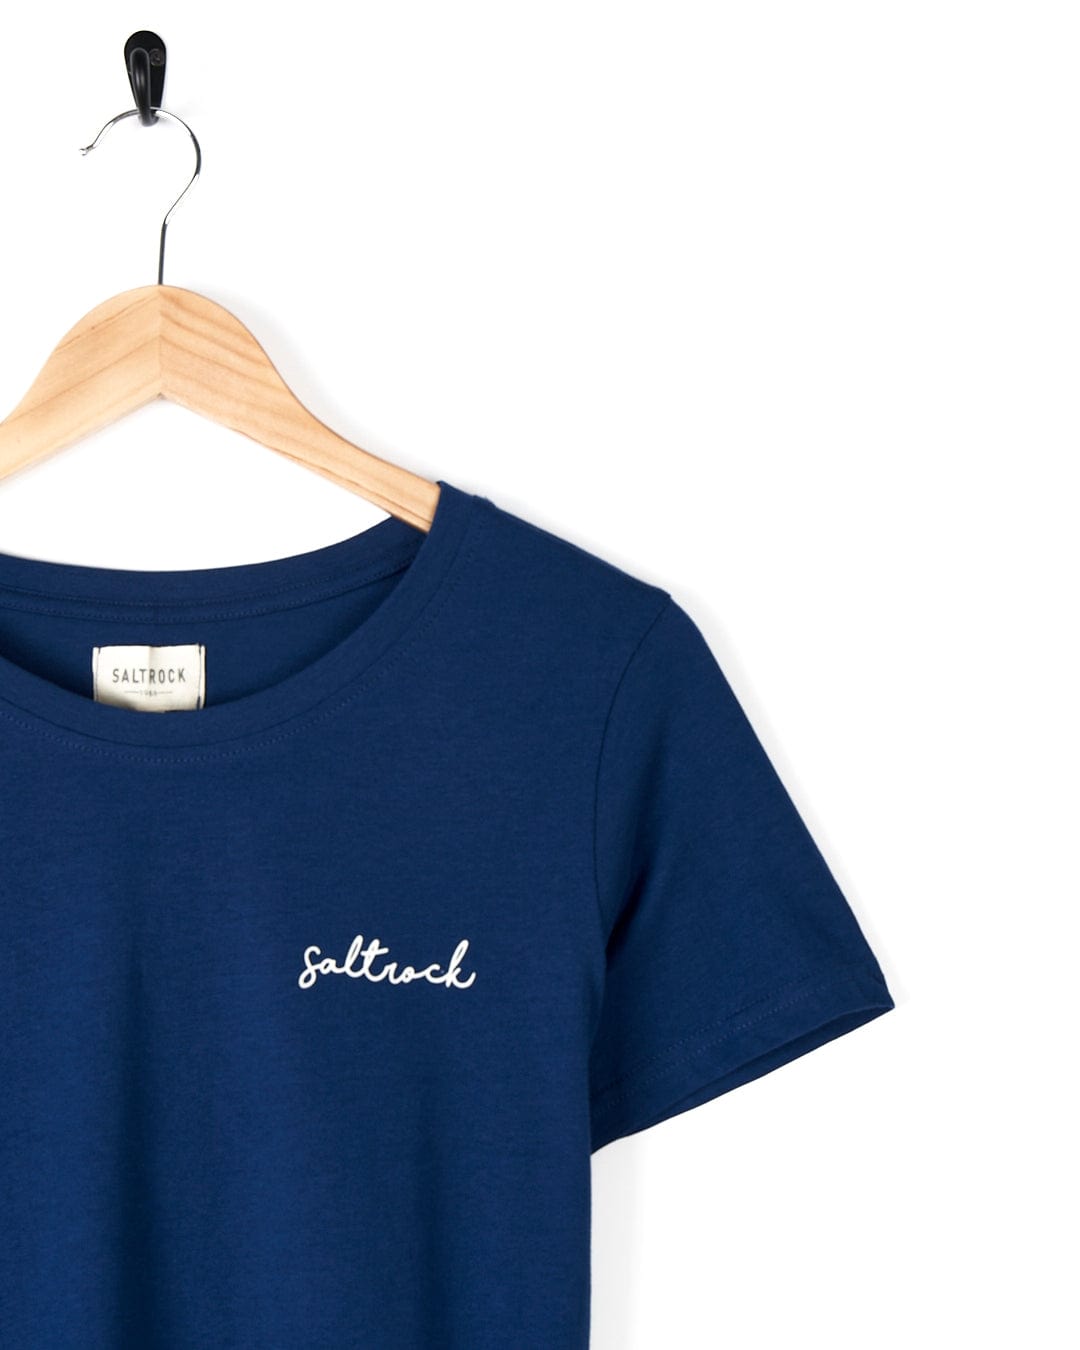 A Saltrock Happiness Velator - Womens T-Shirt - Navy with the word gilded on it.